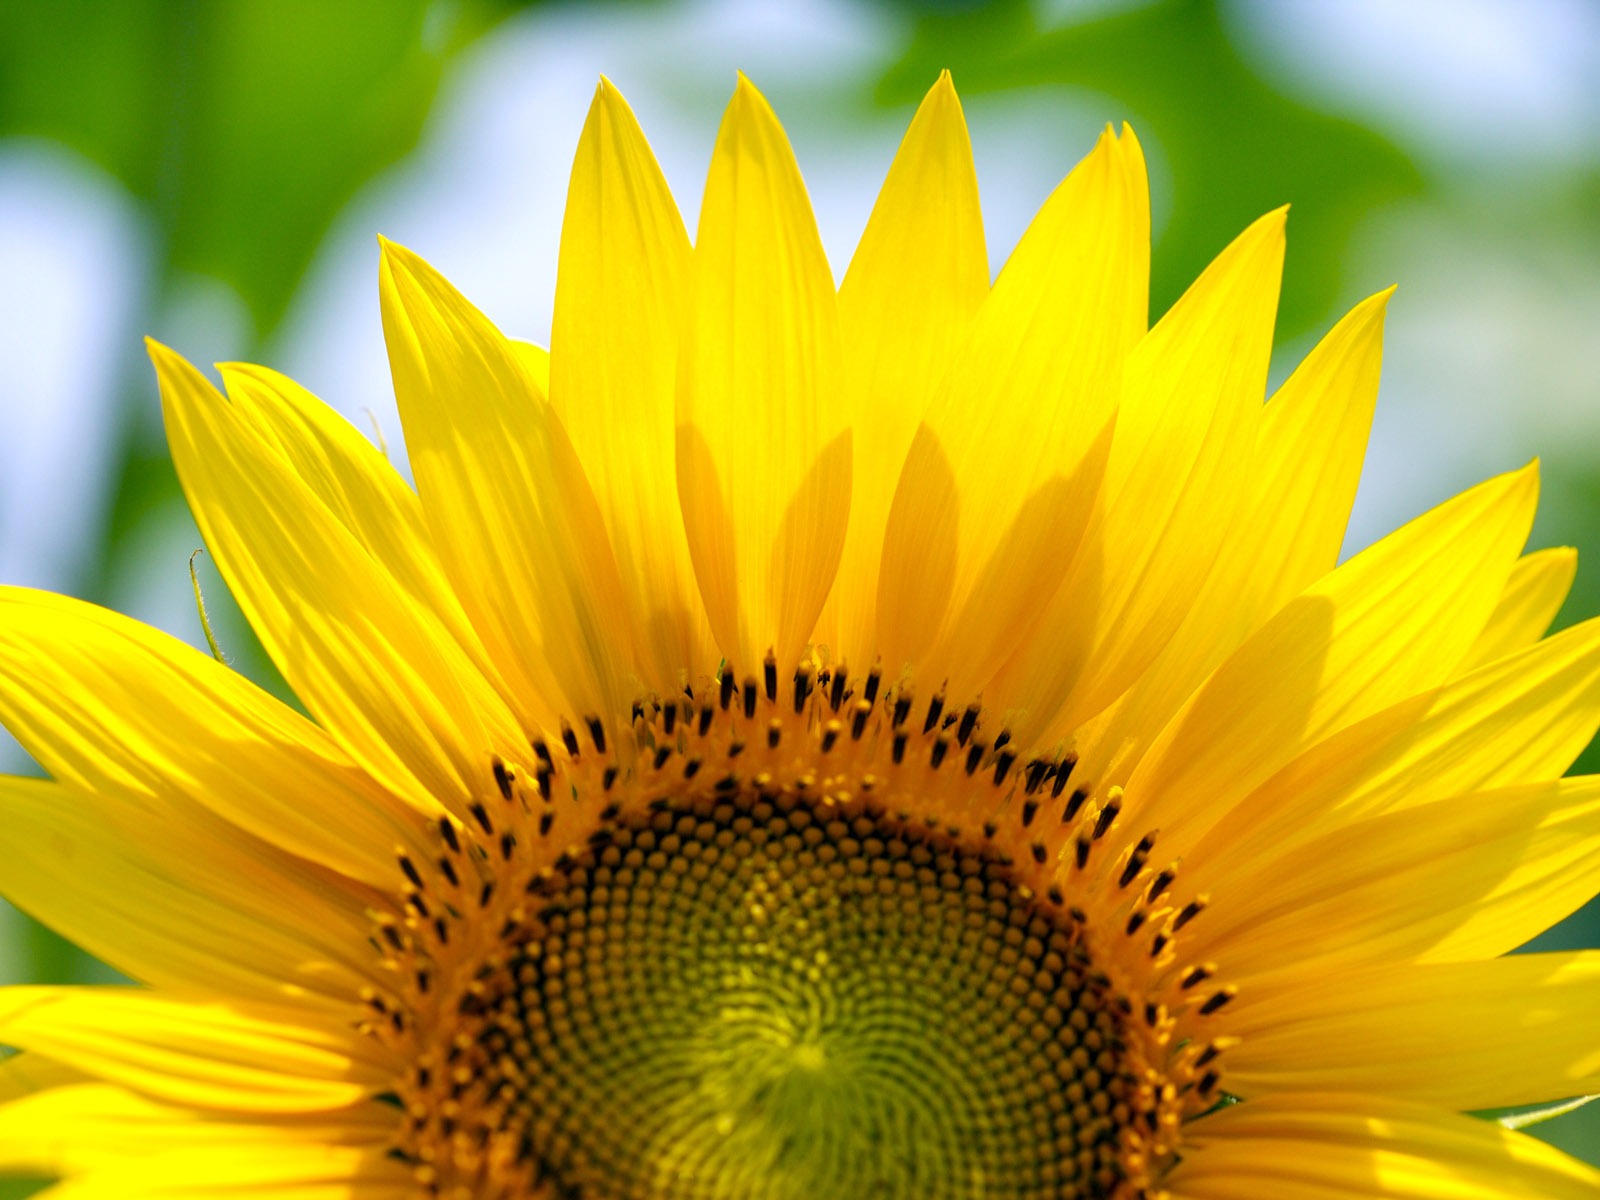 Sunny sunflower photo HD Wallpapers #20 - 1600x1200